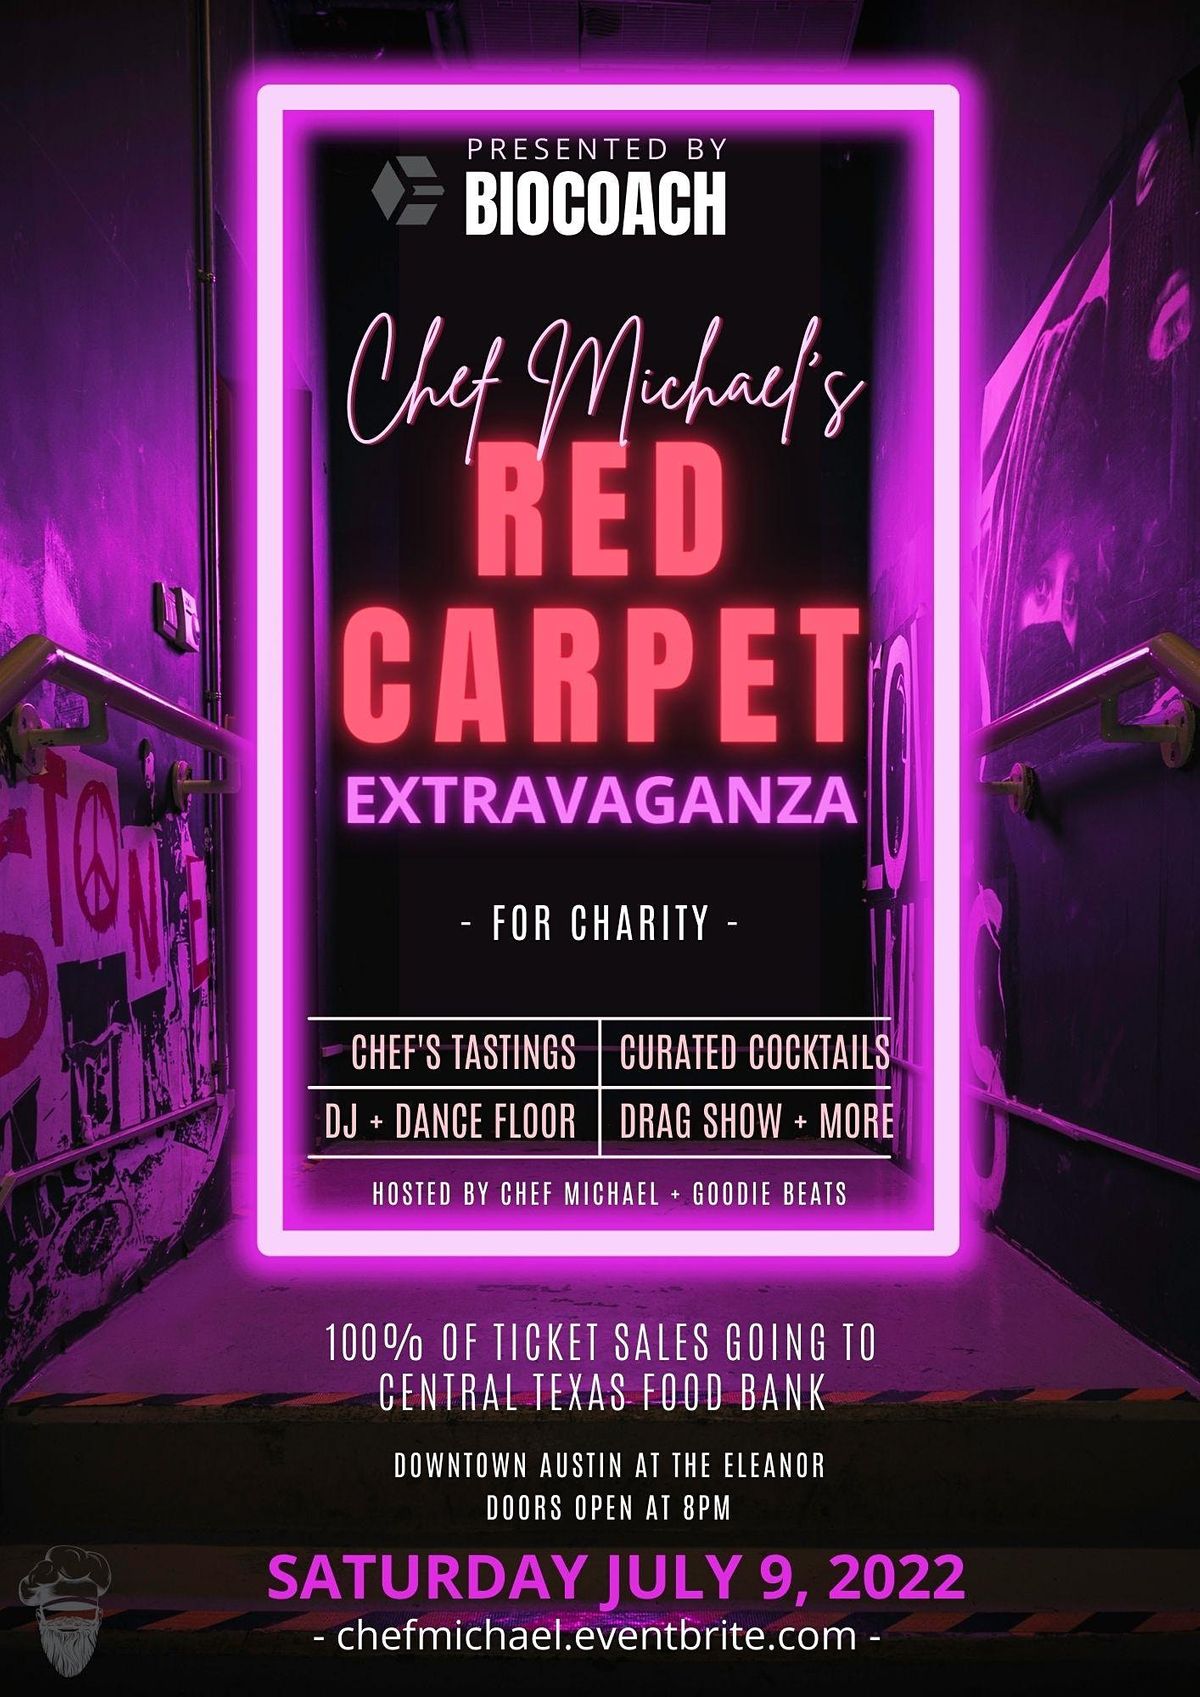 BioCoach Presents: Chef Michael's Red Carpet Extravaganza (FOR CHARITY)